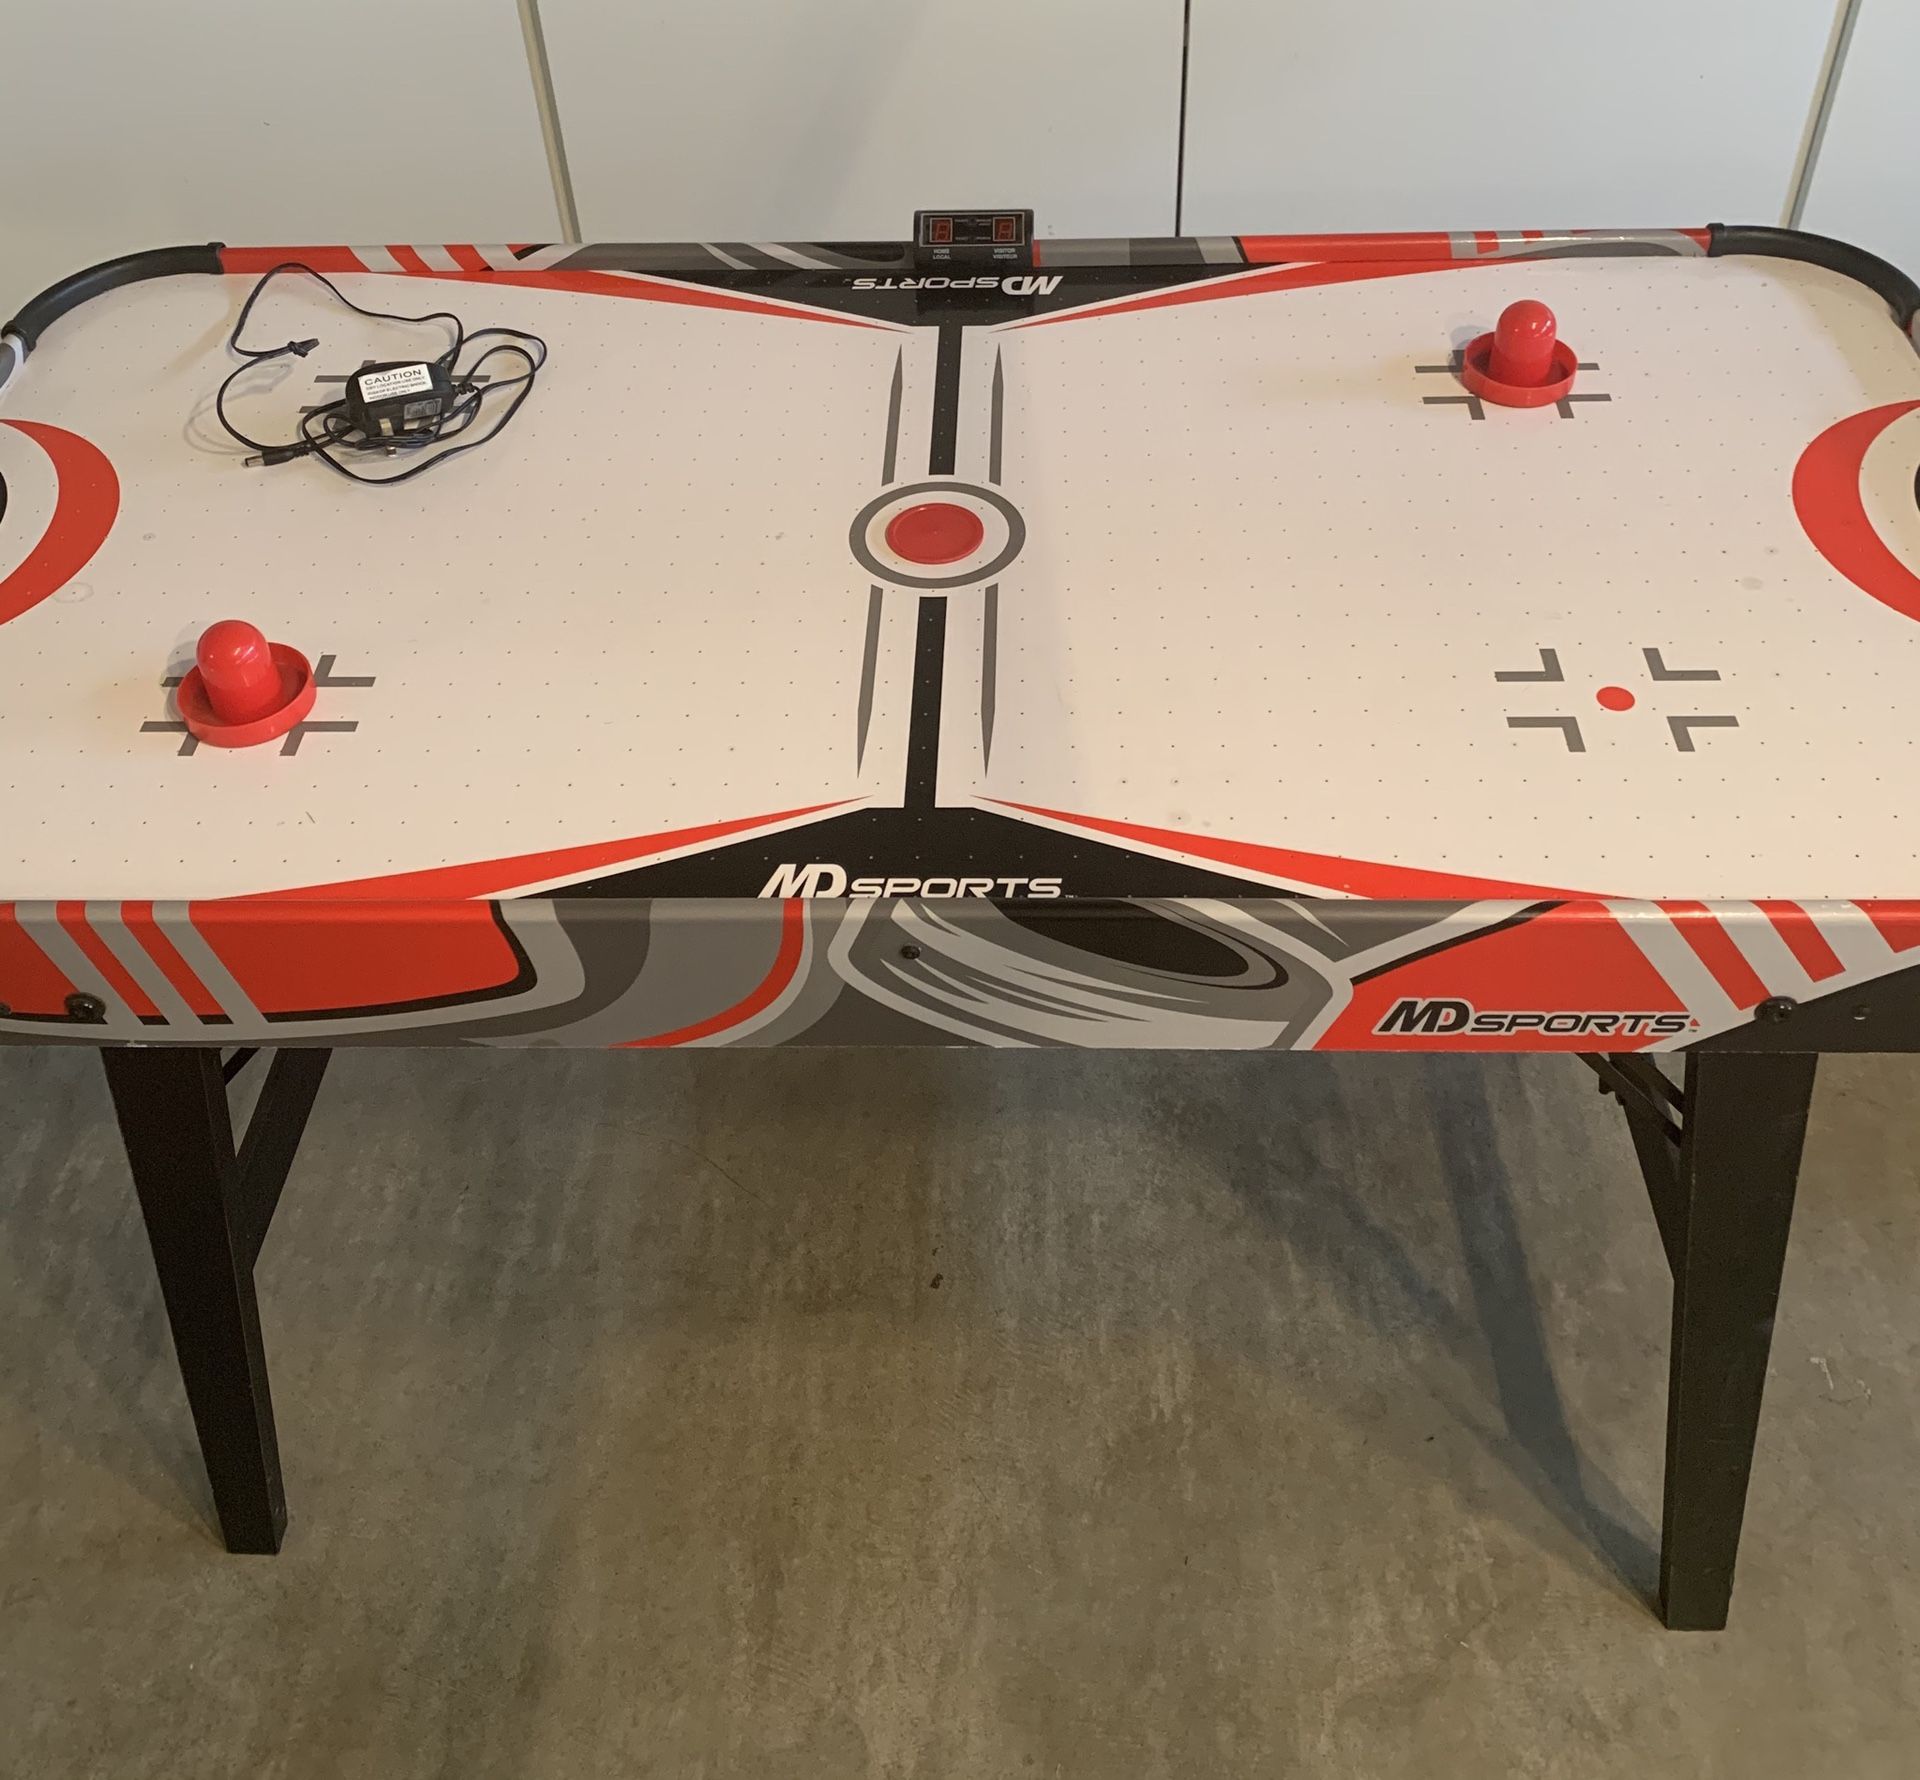 MD Sports 48" Air Powered Hockey Table